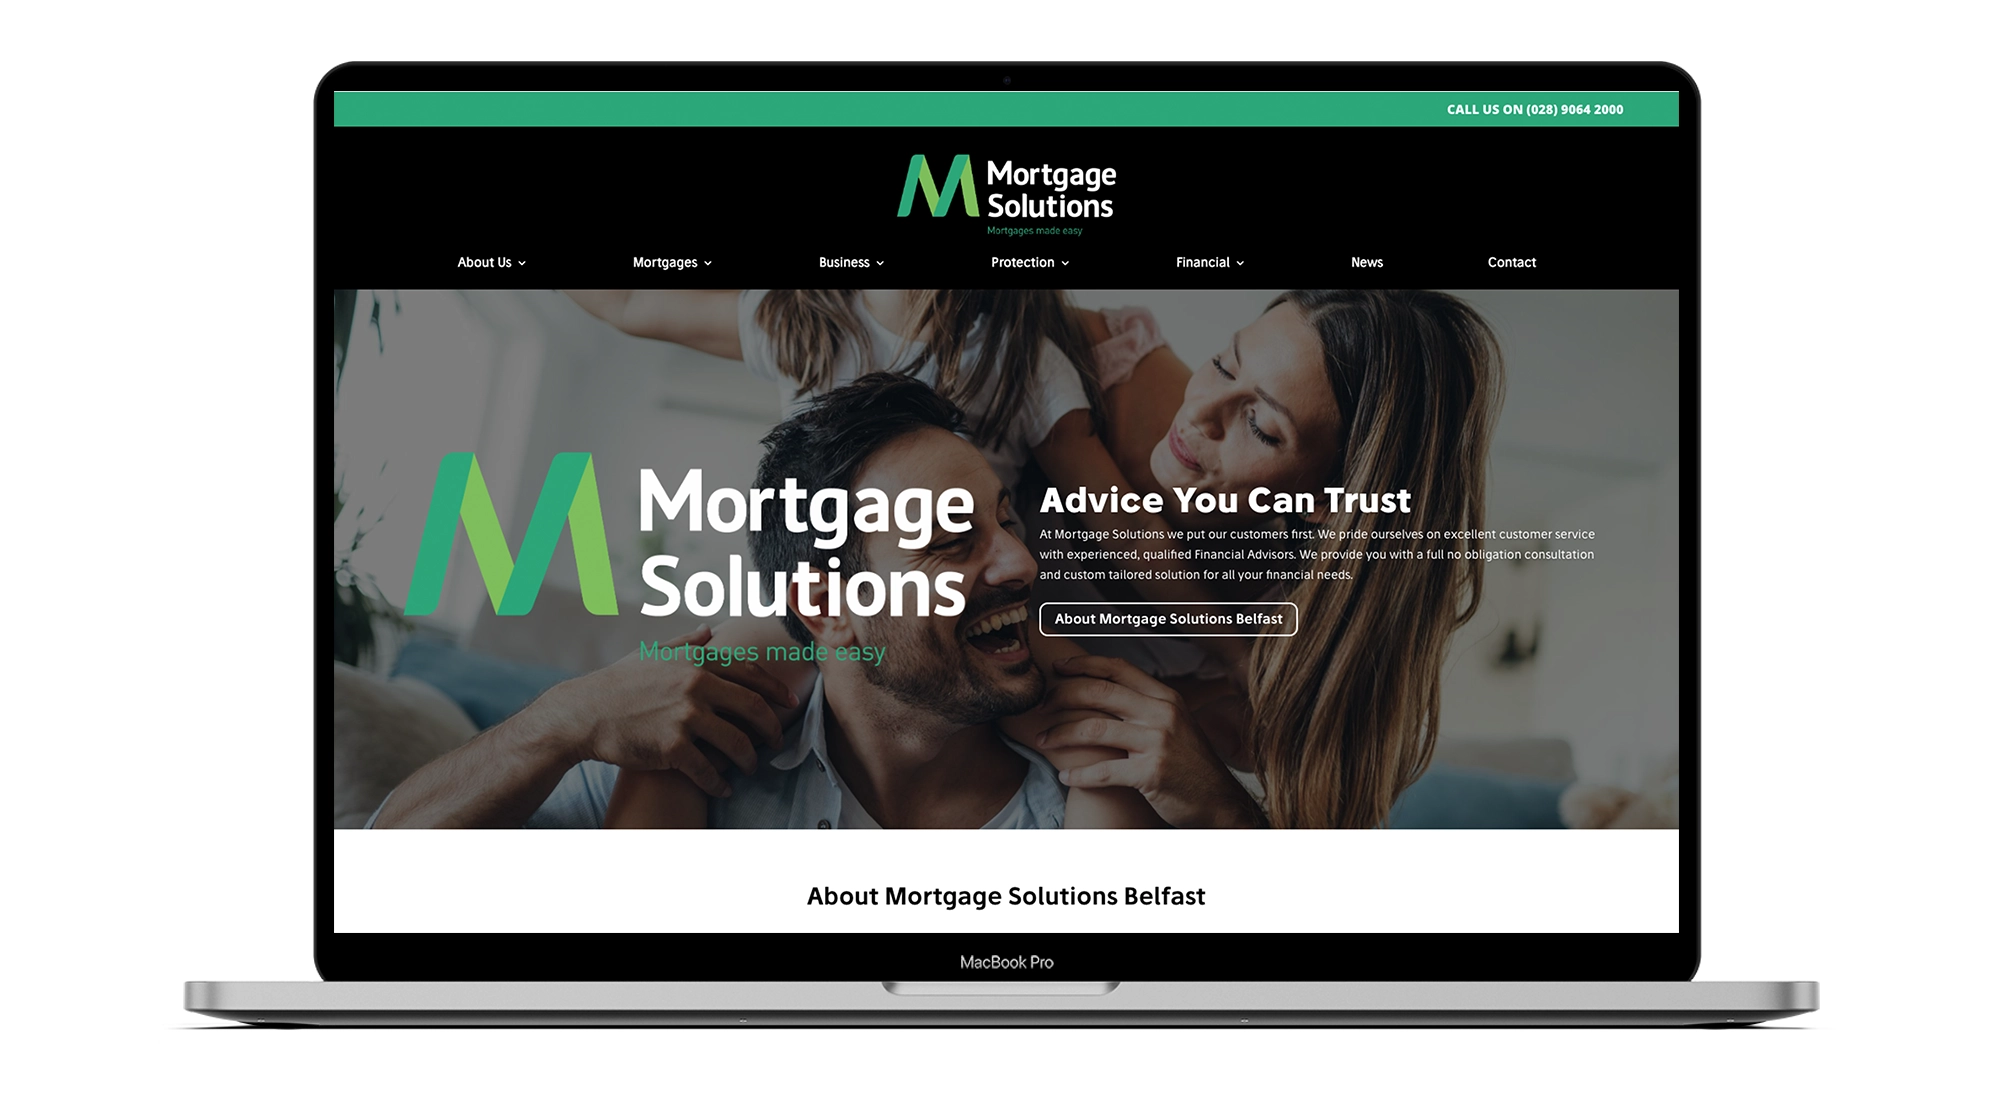 Mortgage Solutions Home Page